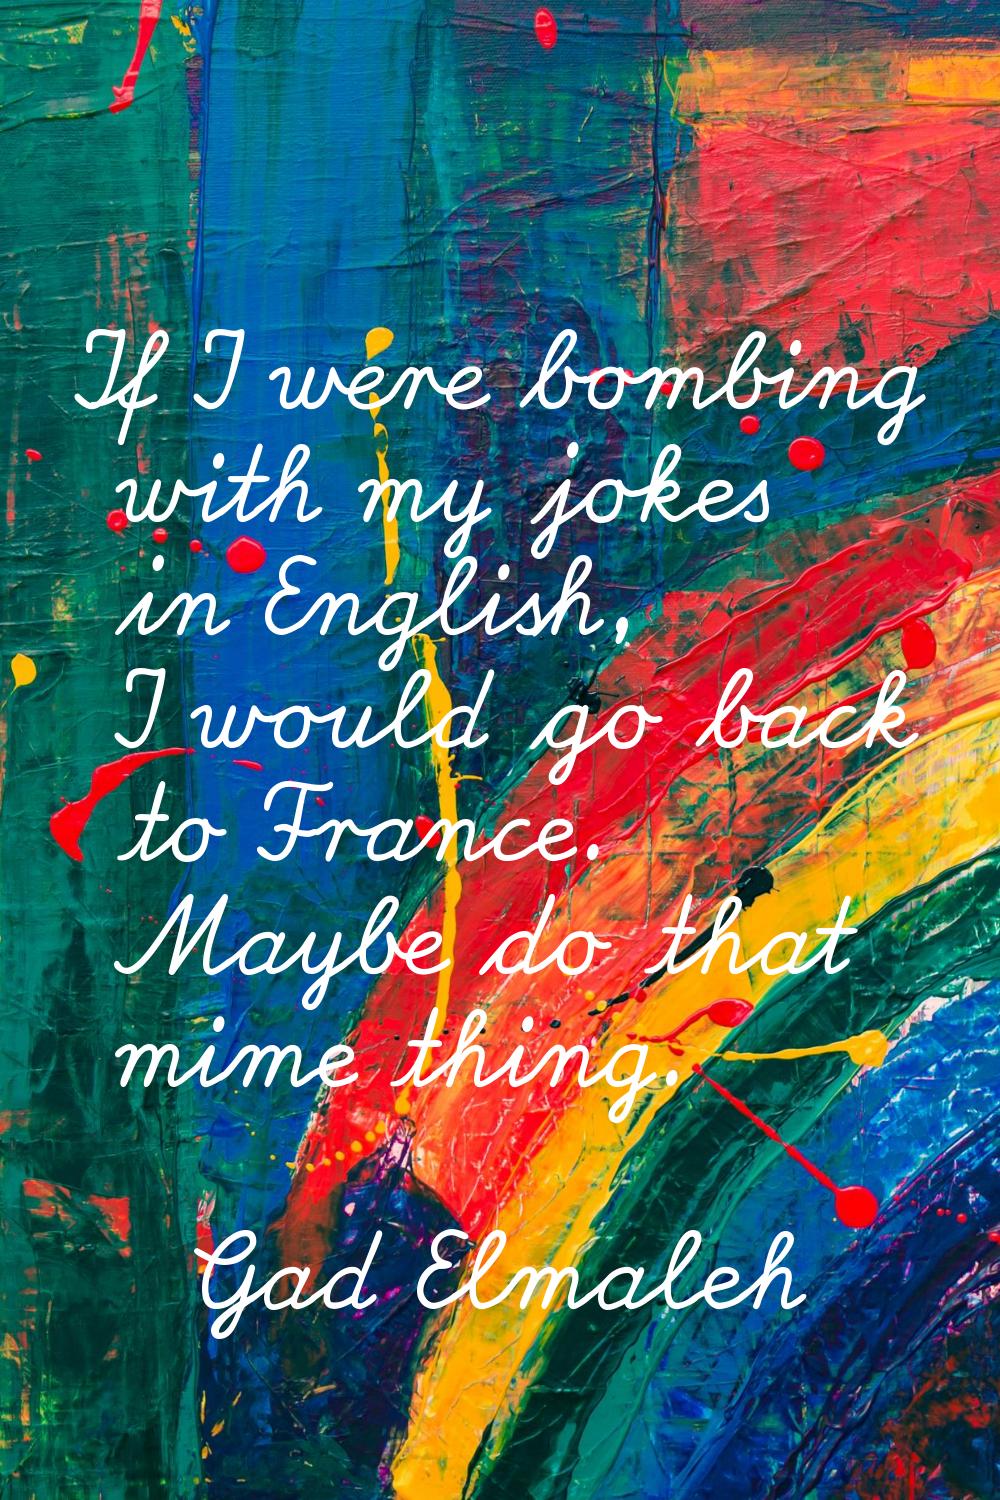 If I were bombing with my jokes in English, I would go back to France. Maybe do that mime thing.